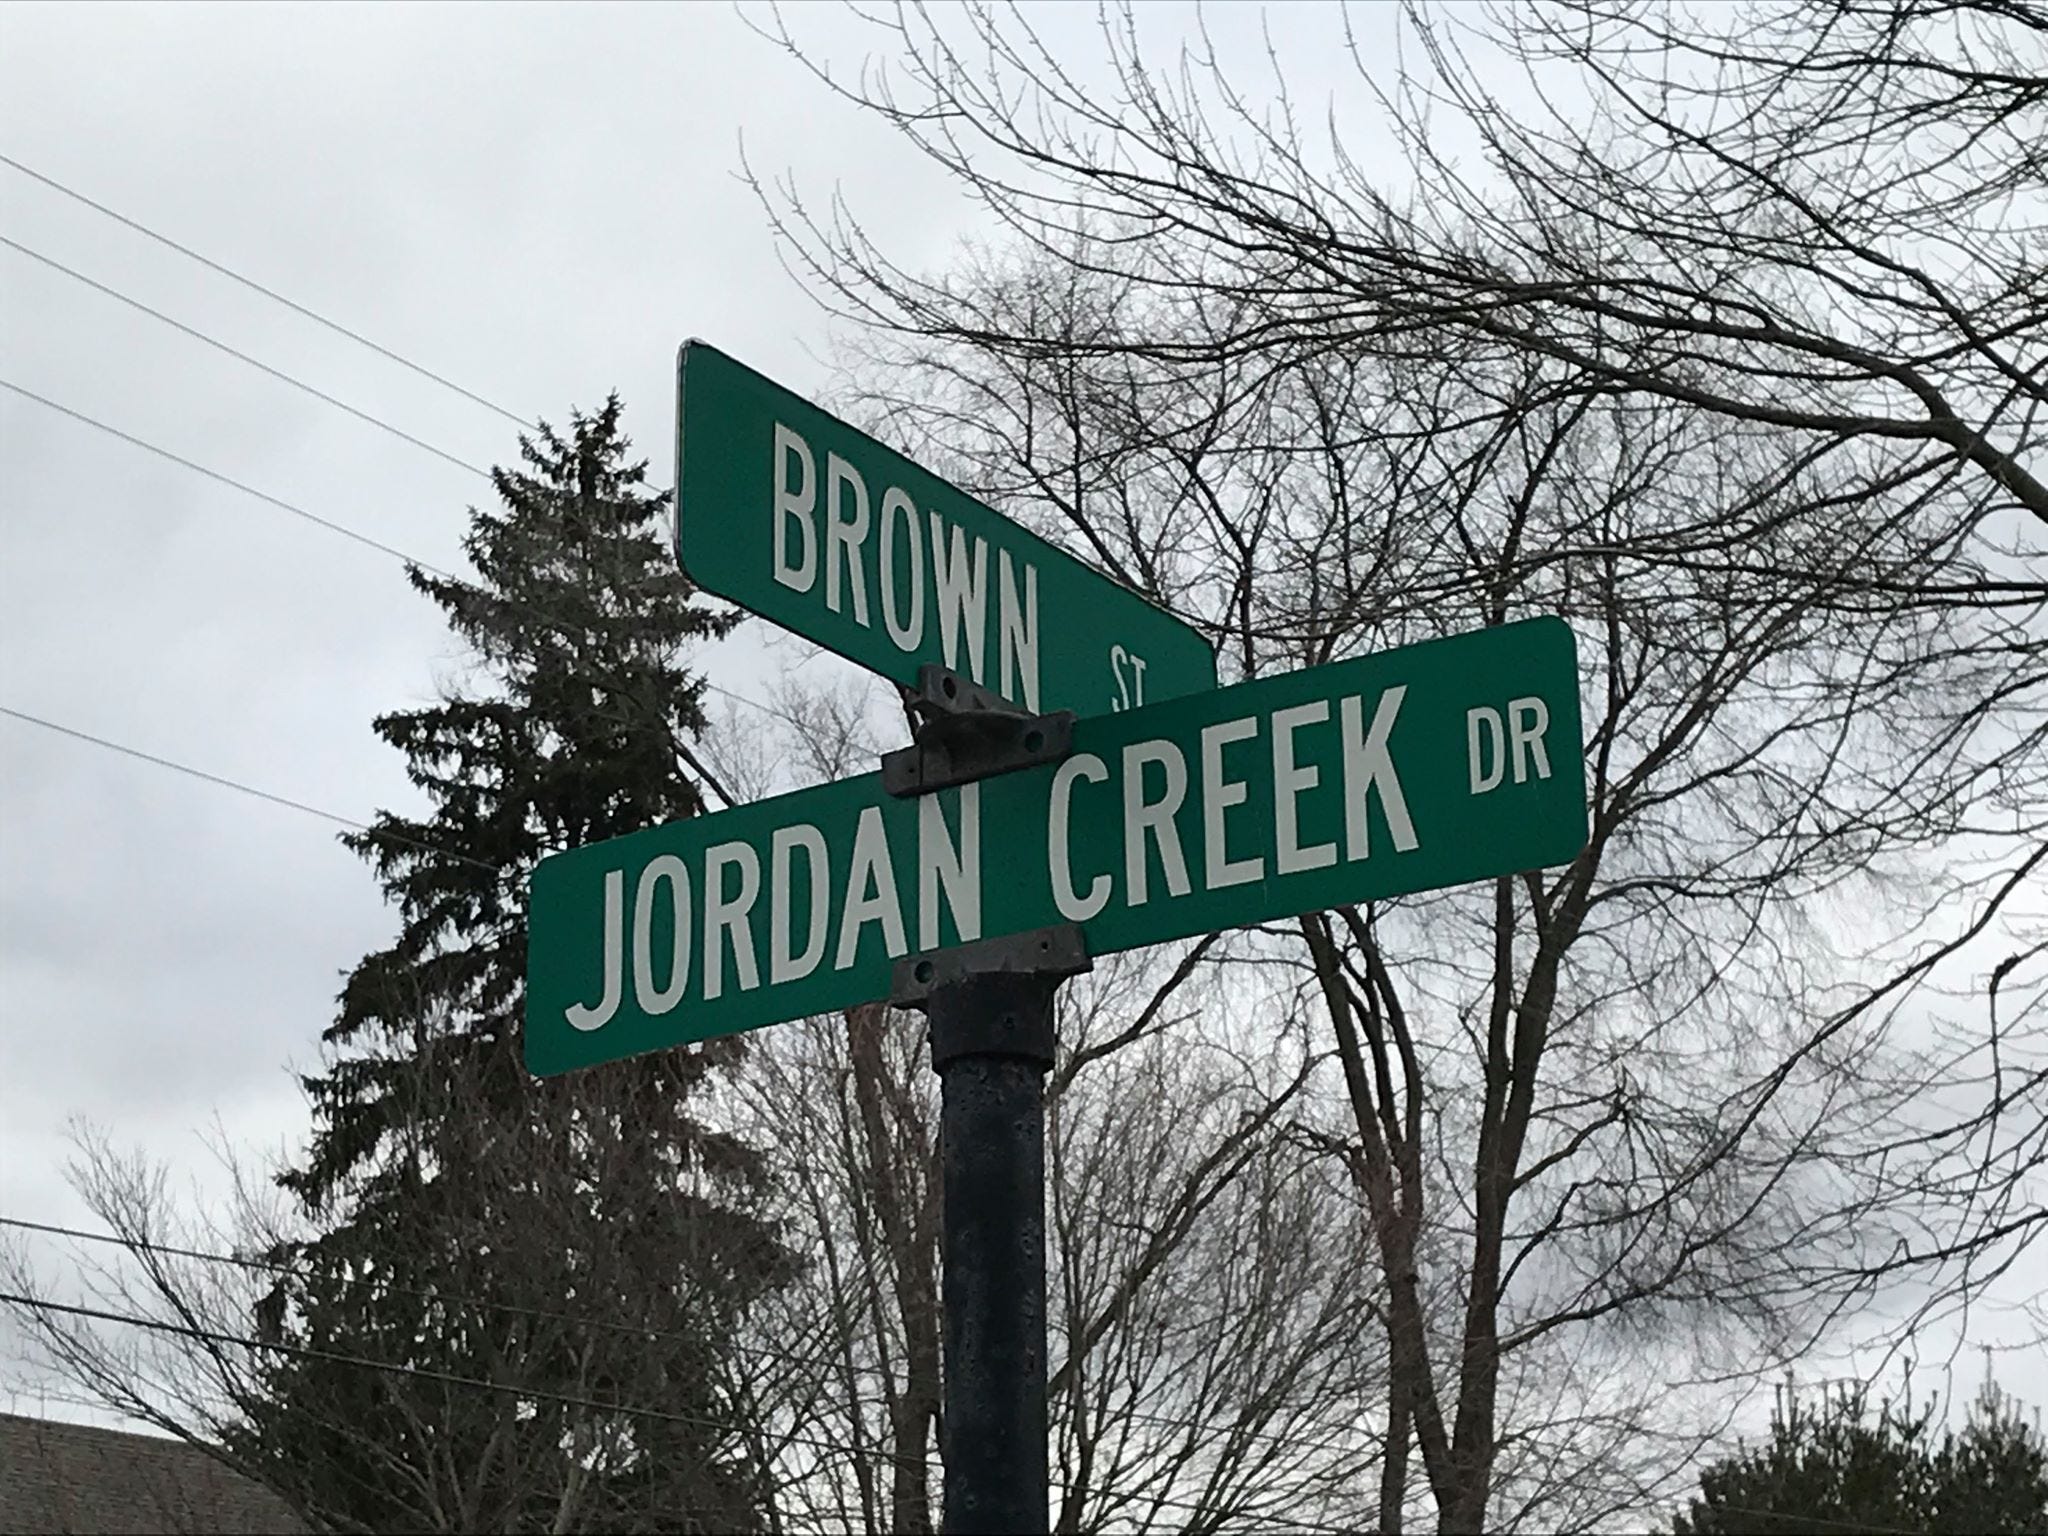 A Leisure Living Management facility, Jordan Creek Assisted Living, will be built near the intersection of Brown Street and Jordan Creek Drive in St. Clair.